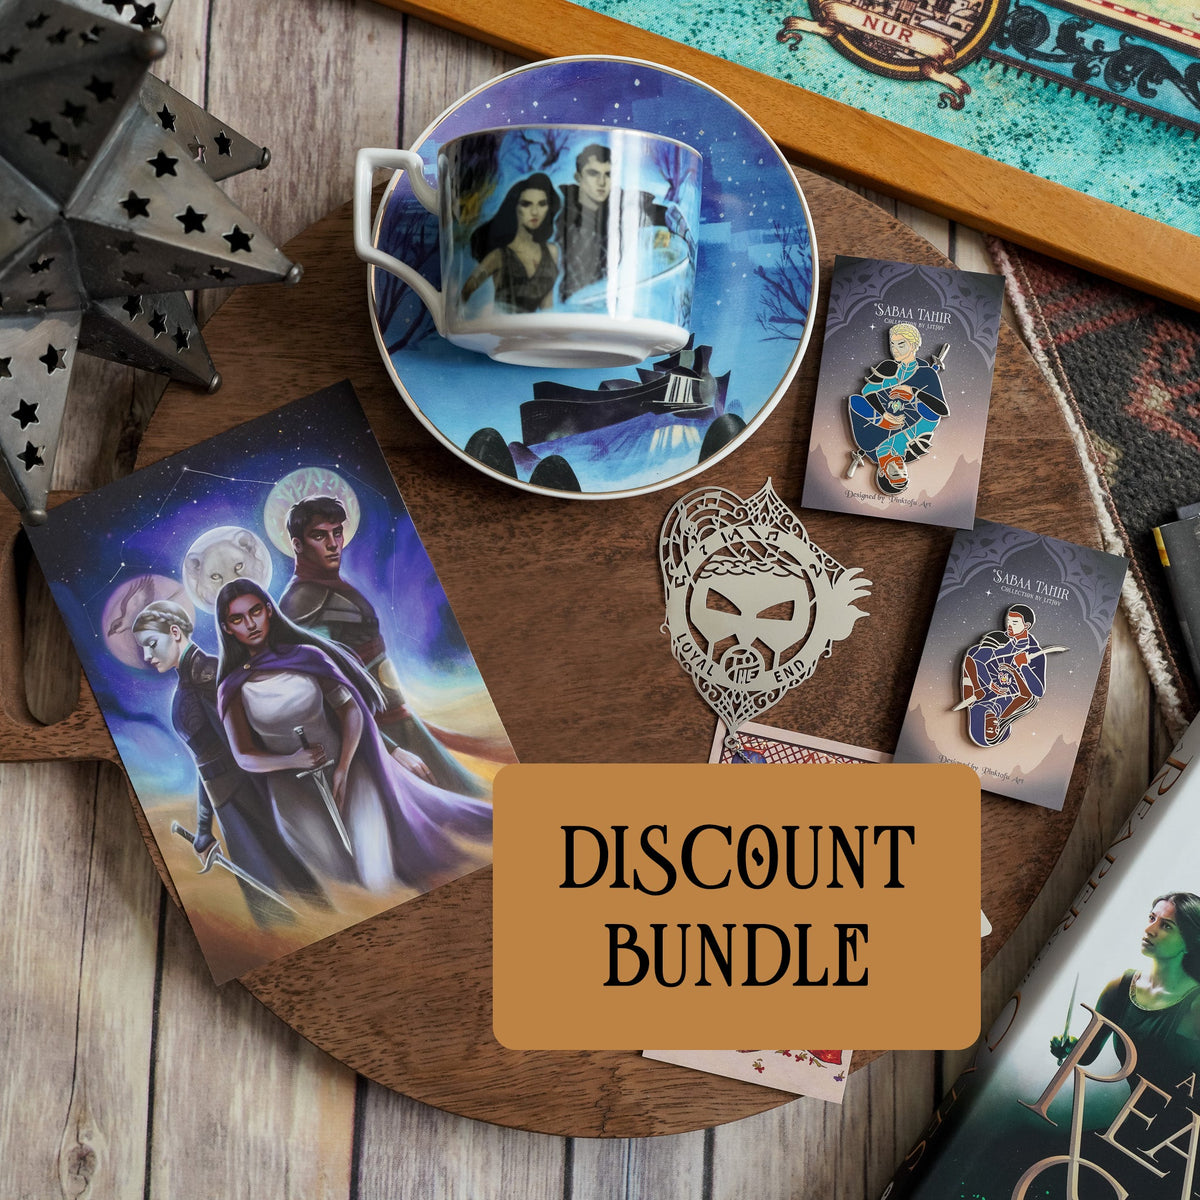 An Ember in the Ashes Discount Bundle from LitJoy Crate | Collectibles &amp; Gifts for Booklovers